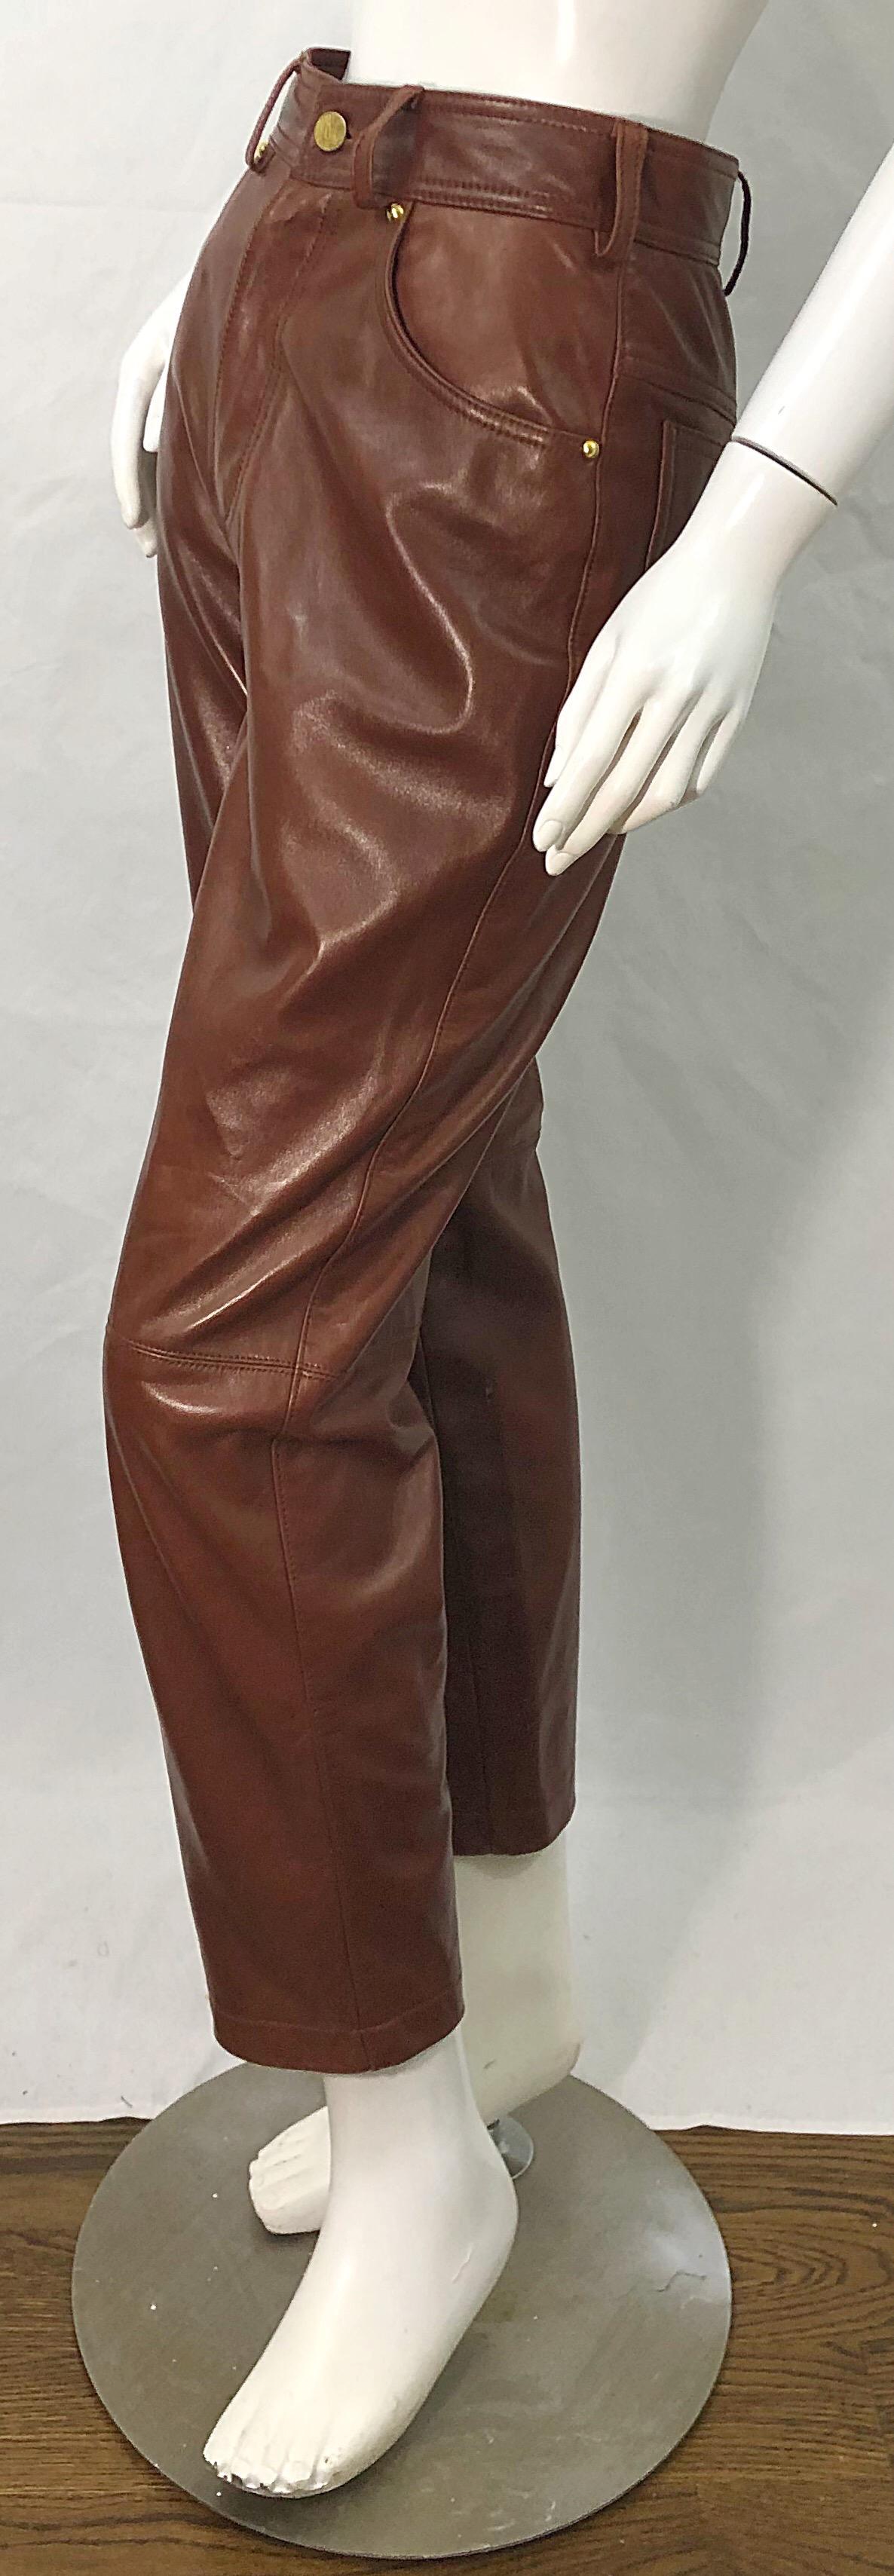 1990s Escada by Margaretha Ley Size 34 / US 2 Caramel Brown 80s Leather Pants For Sale 1